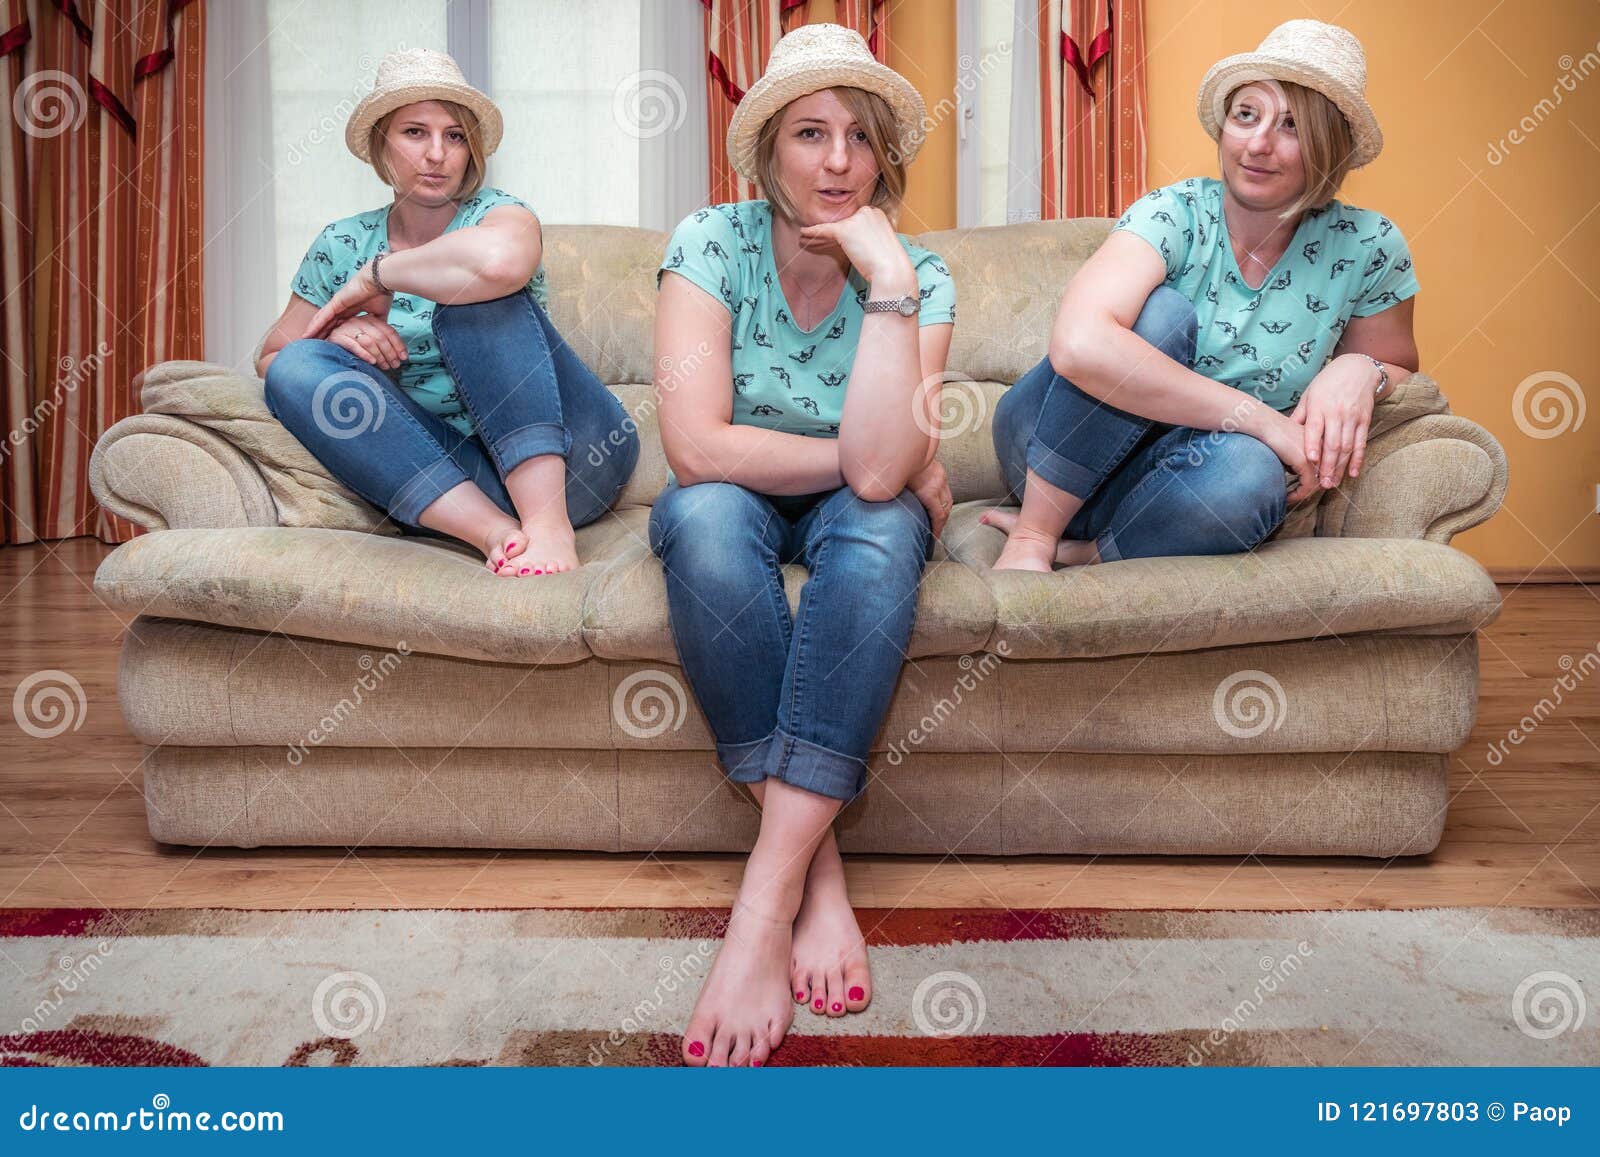 Three Women Sitting On The Sofa Stock Image Image Of Adult Casual 121697803